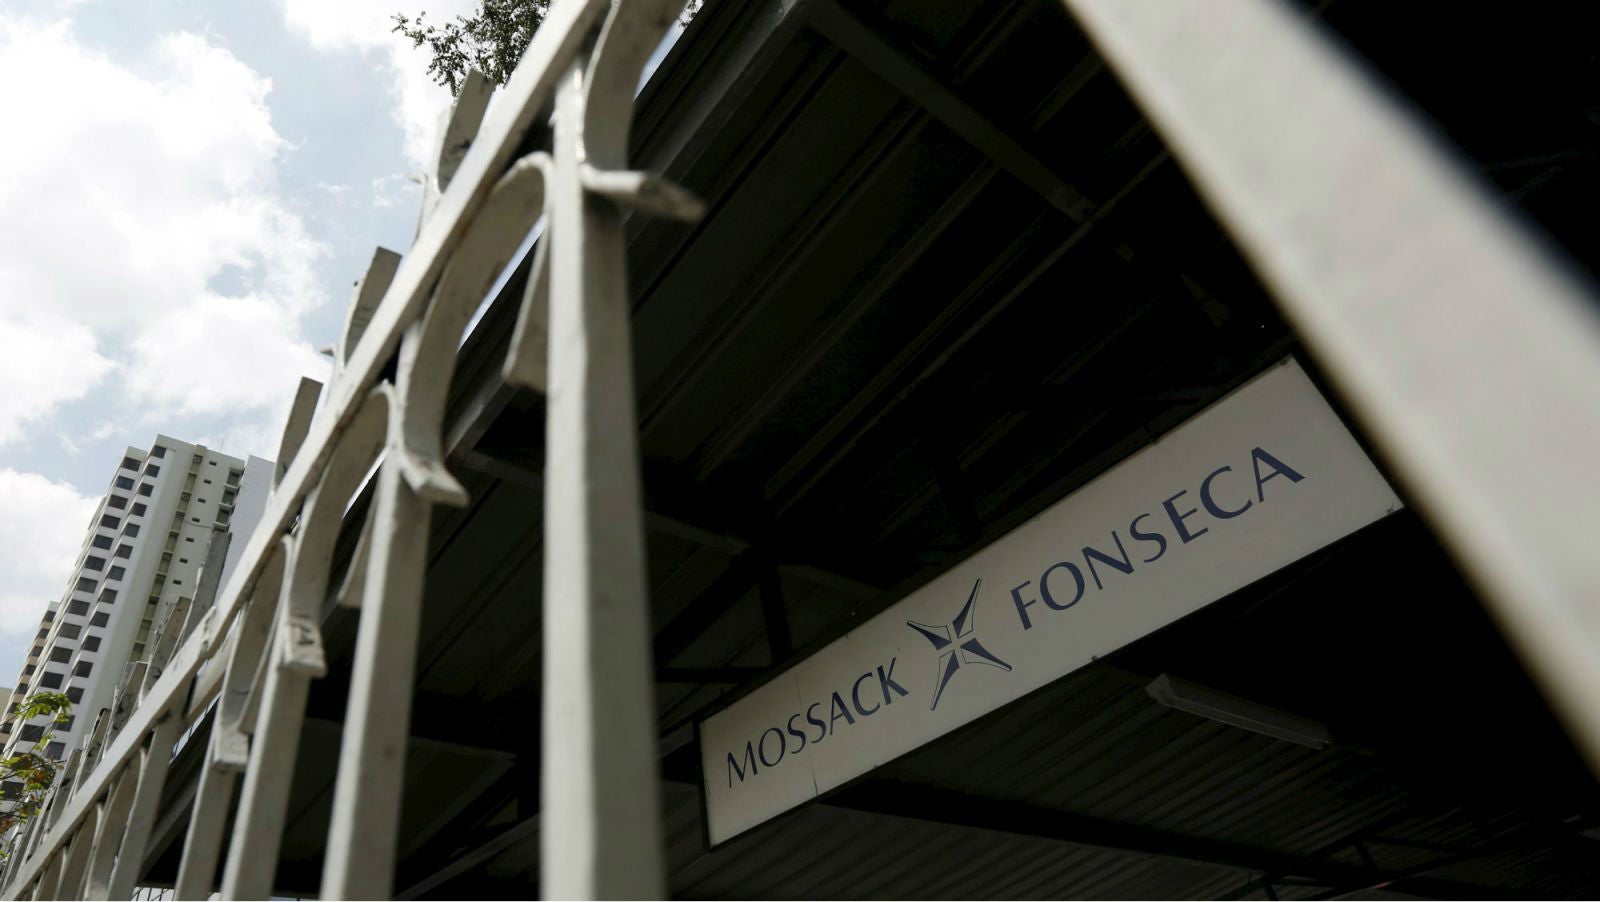 The legal firm Mossack Fonseca aggressively maintained the secrets of its many clients